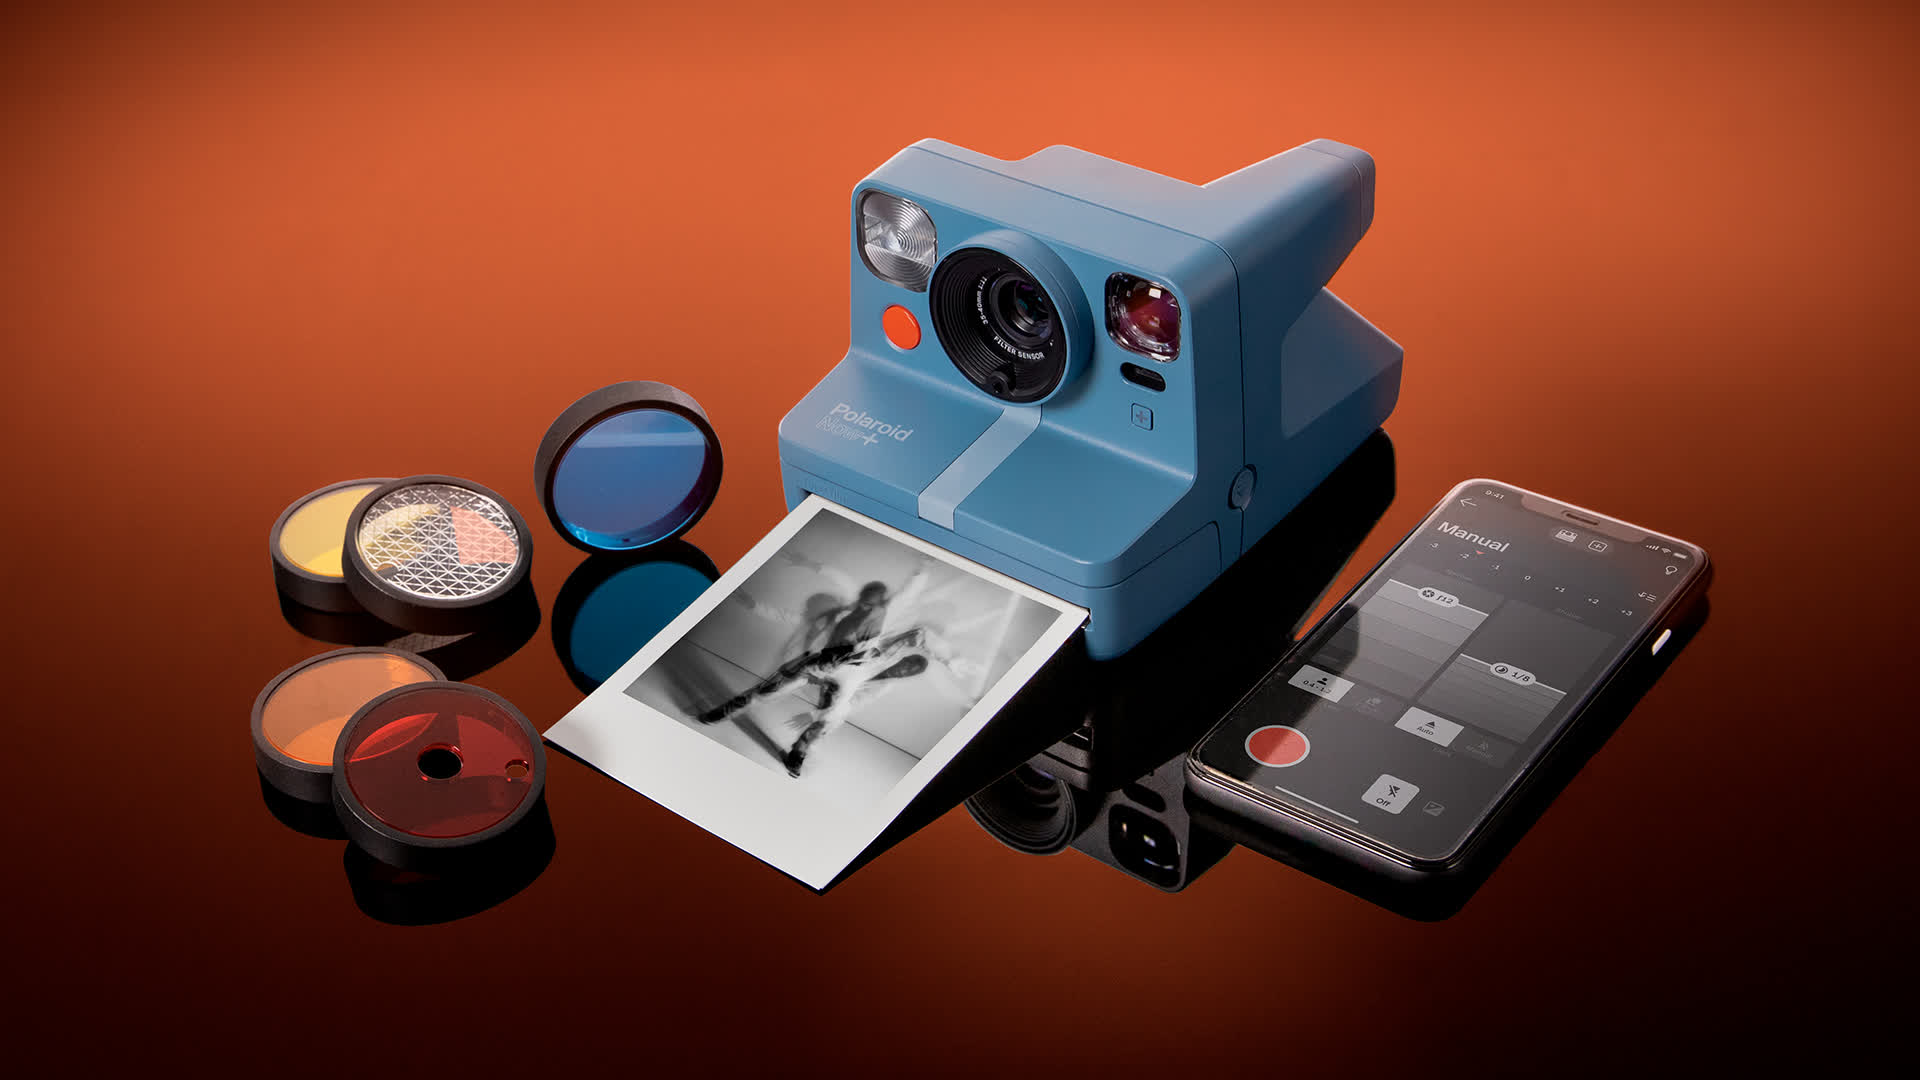 Polaroid's latest instant camera blends old school usability with modern connectivity